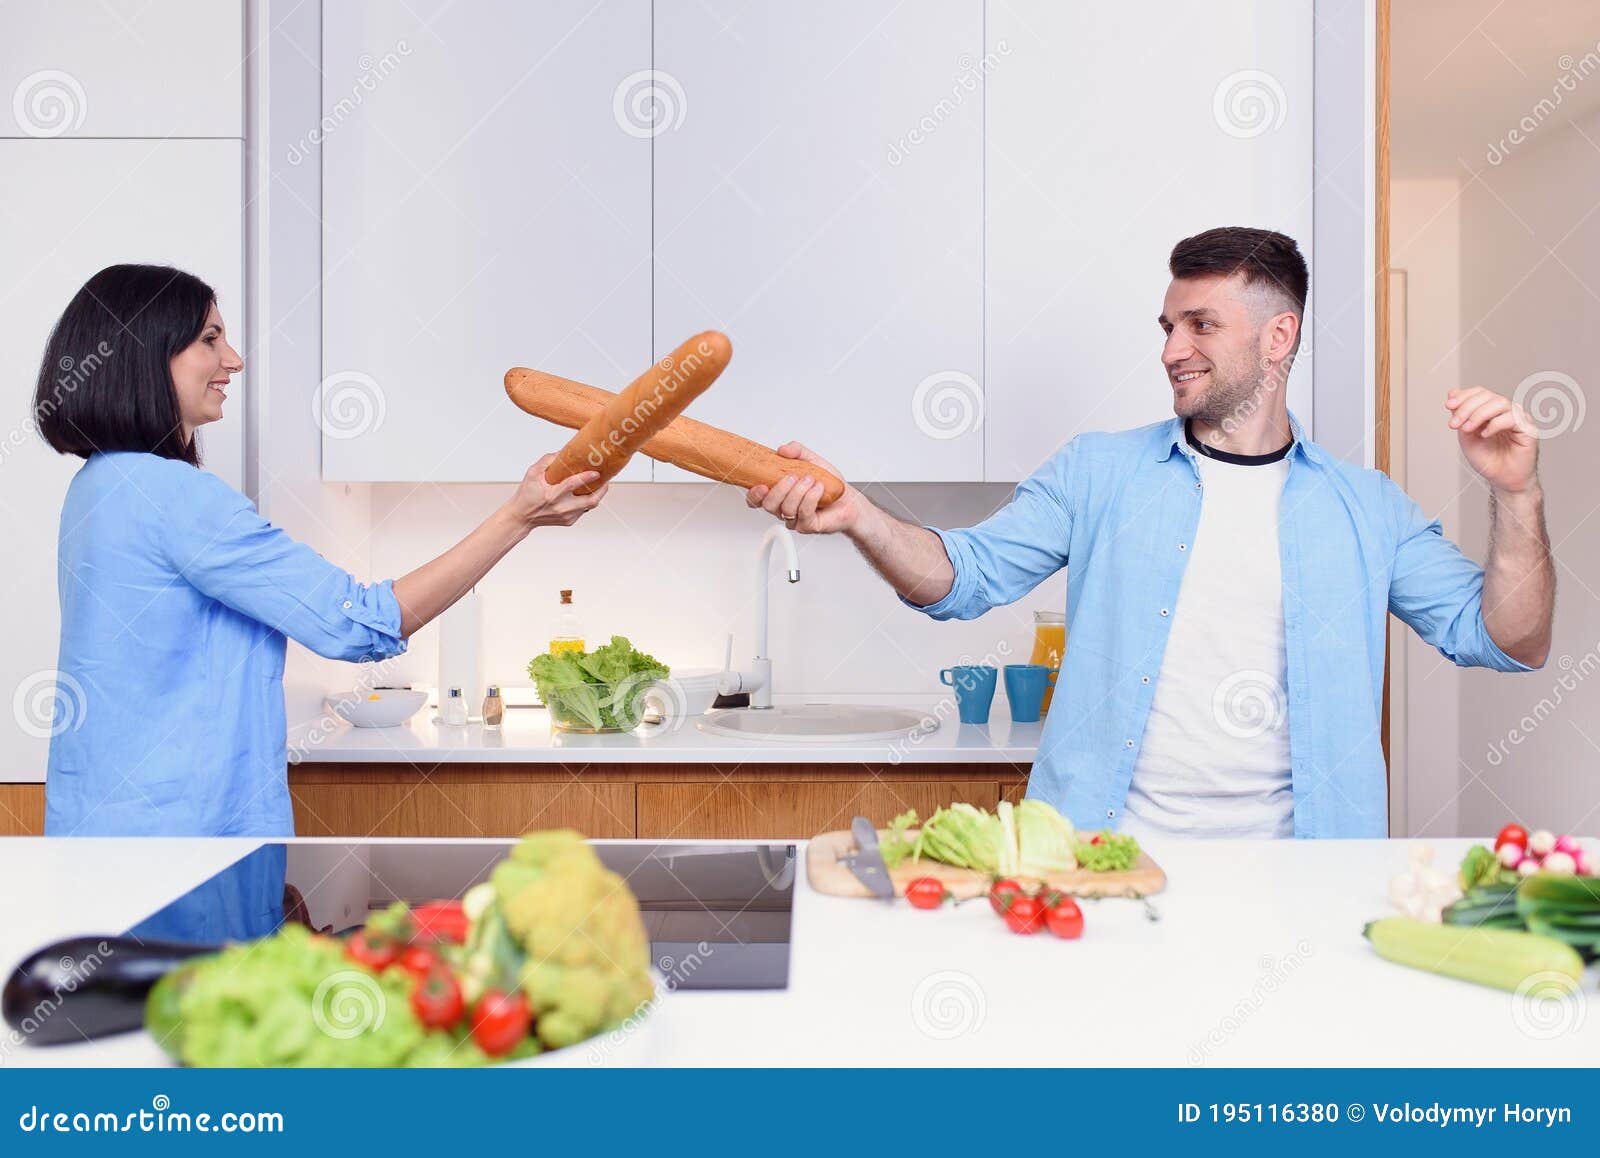 Funny Couple Fight with Baguettes while Cooking at Home Together, Husband  and Wife Feeling Playful in the Kitchen. Stock Photo - Image of girl,  husband: 195116380